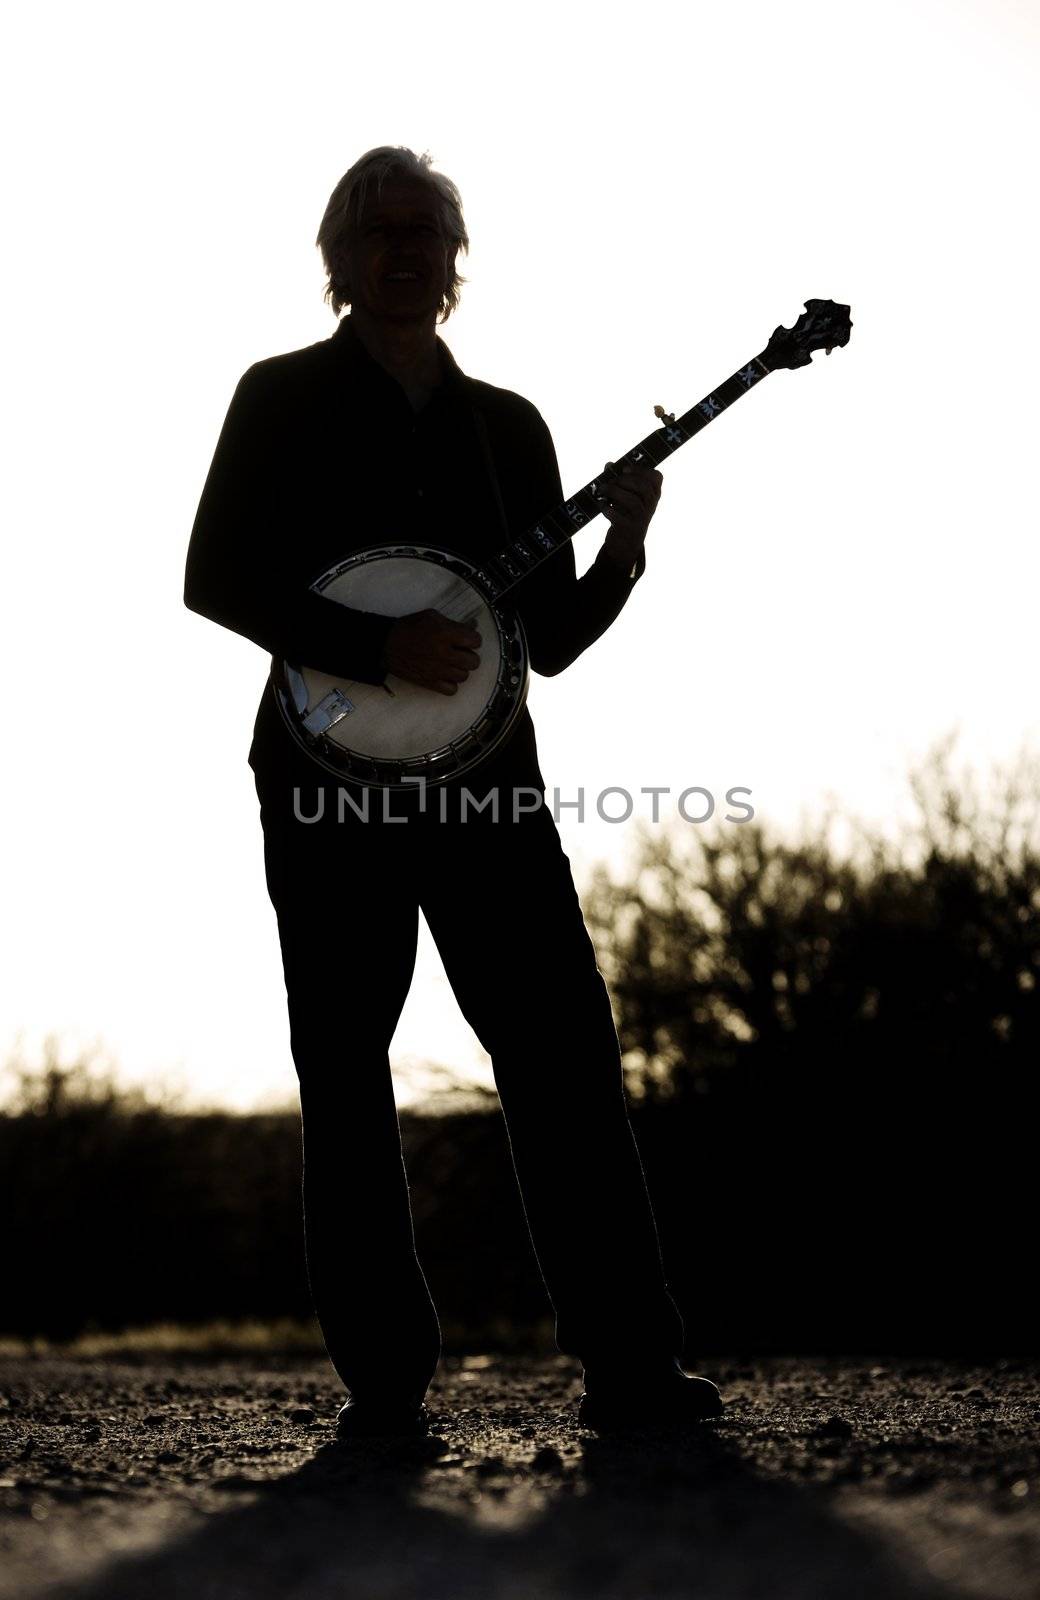 Banjo player with his instrument in silhouette